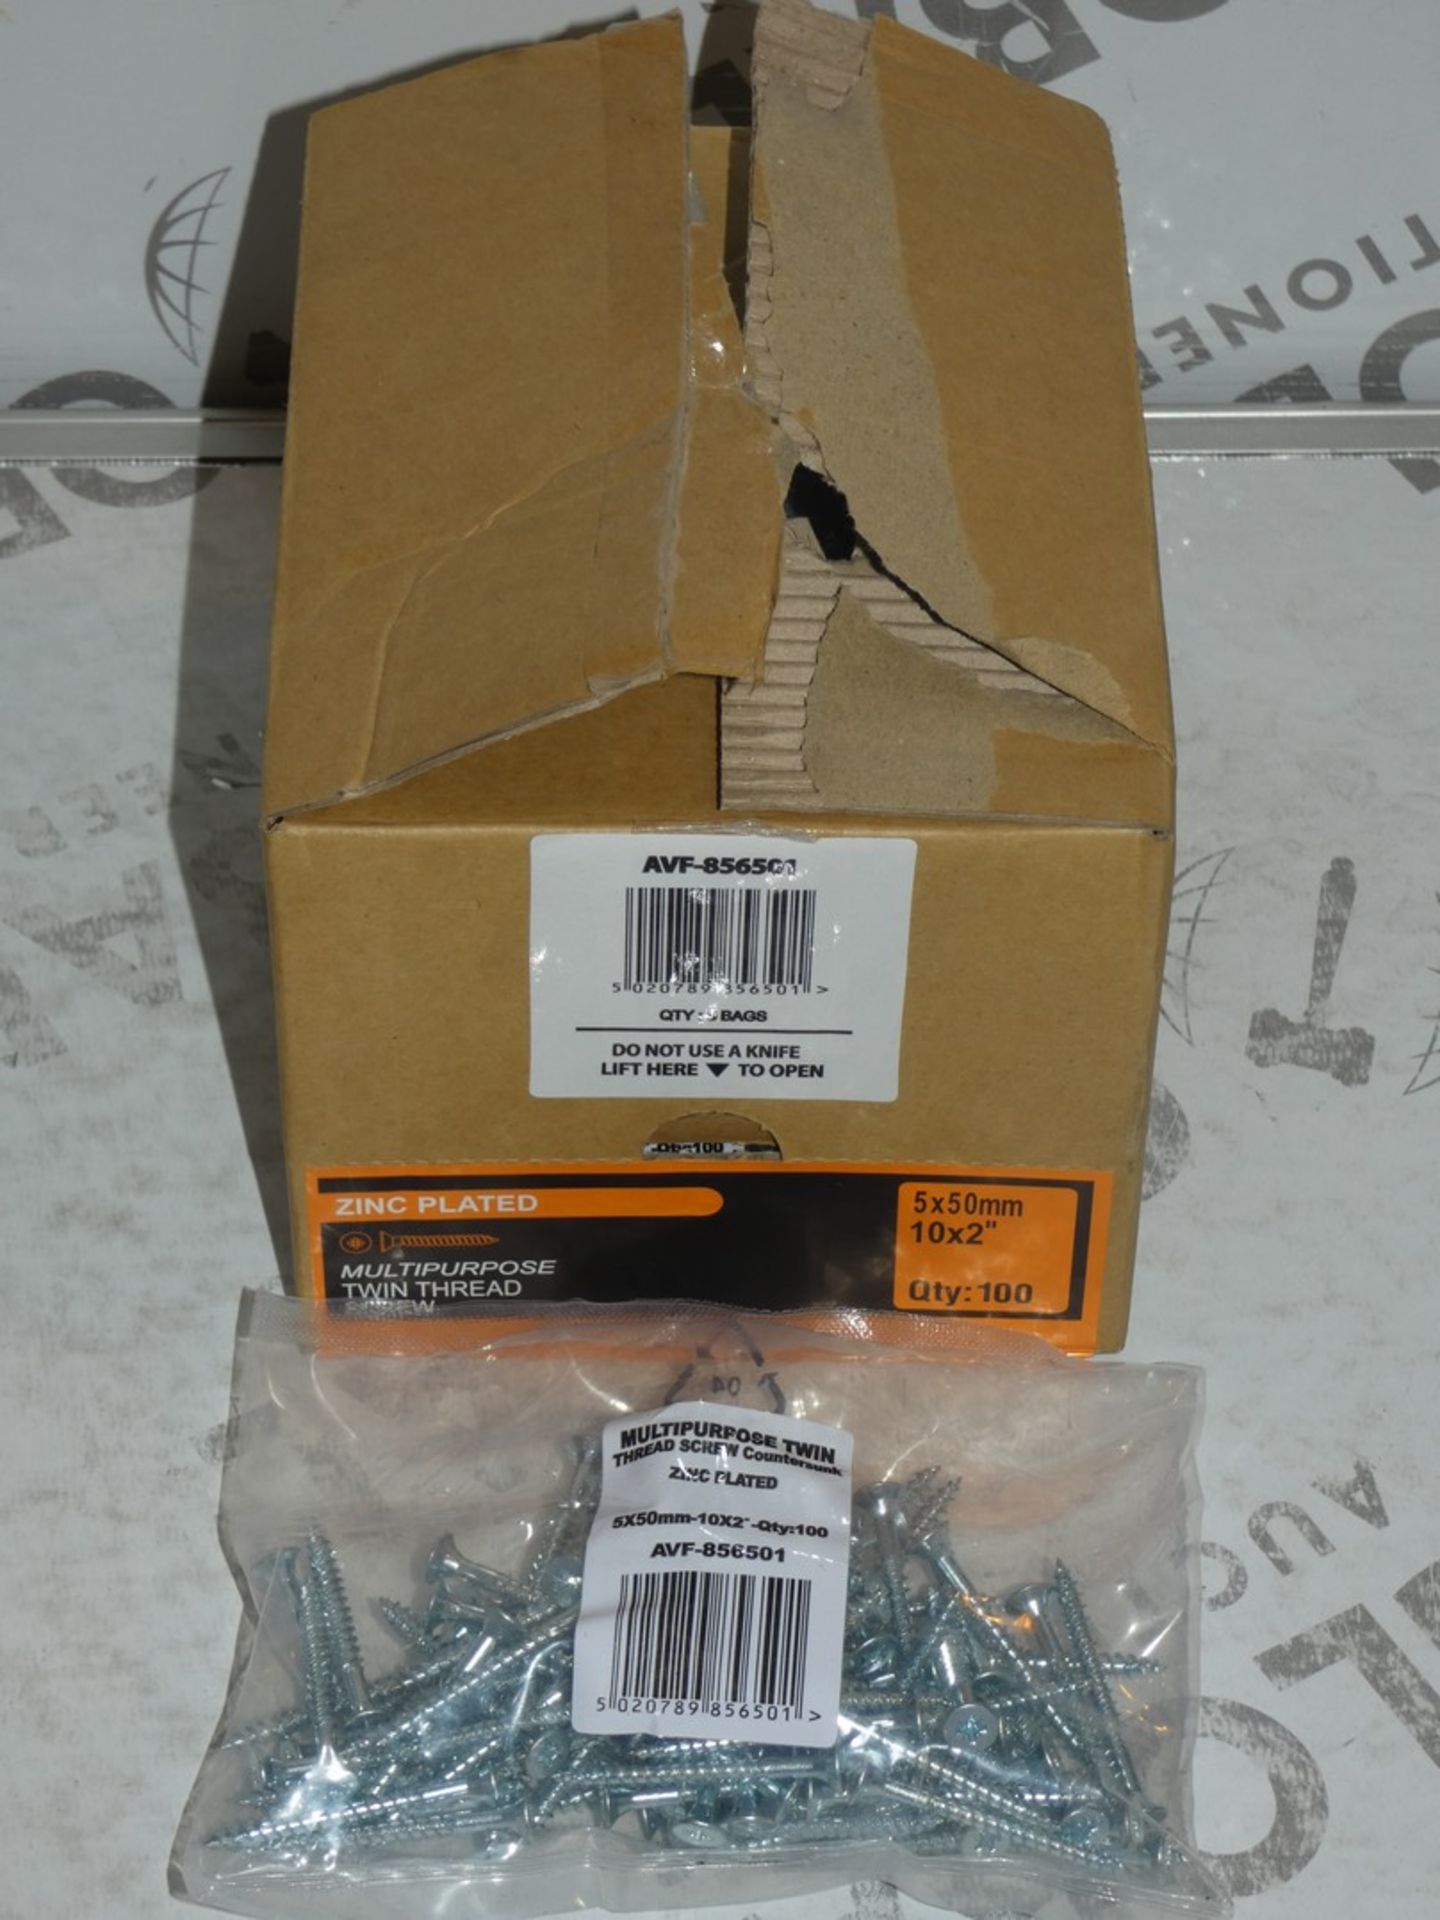 Lot to Contain 5 Boxes Each Containing 5 Packs of 100 Brand New 5 x 50mm Zinc Plated Twin Thread